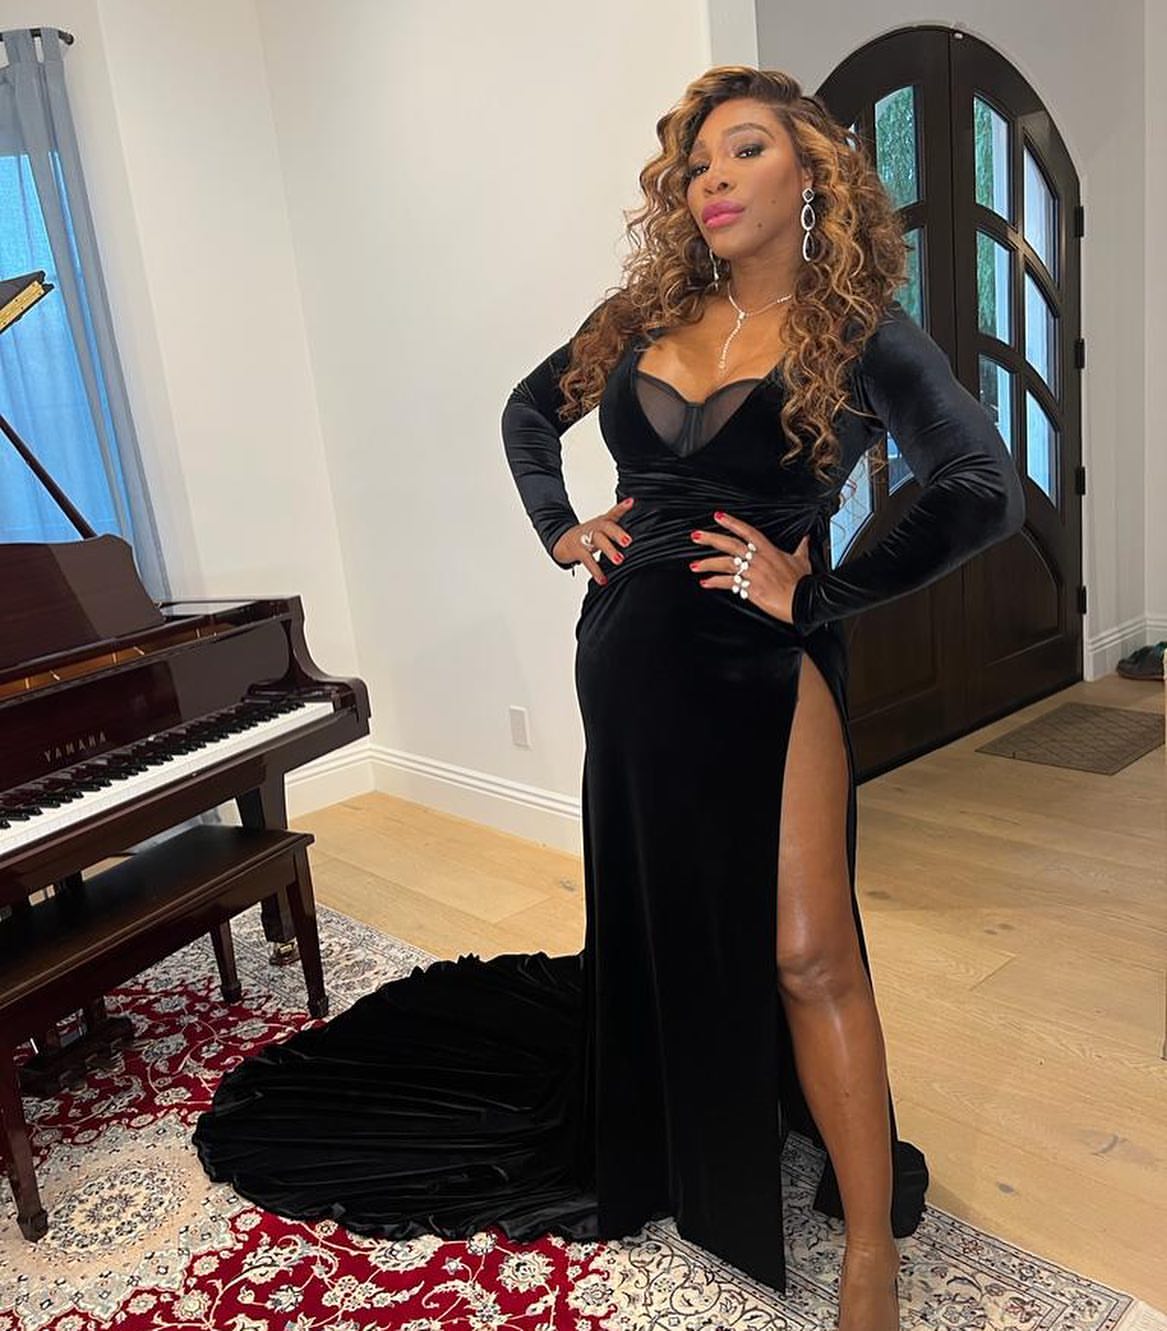 Serena Williams Shares Her Big Reveal! - Photo 13